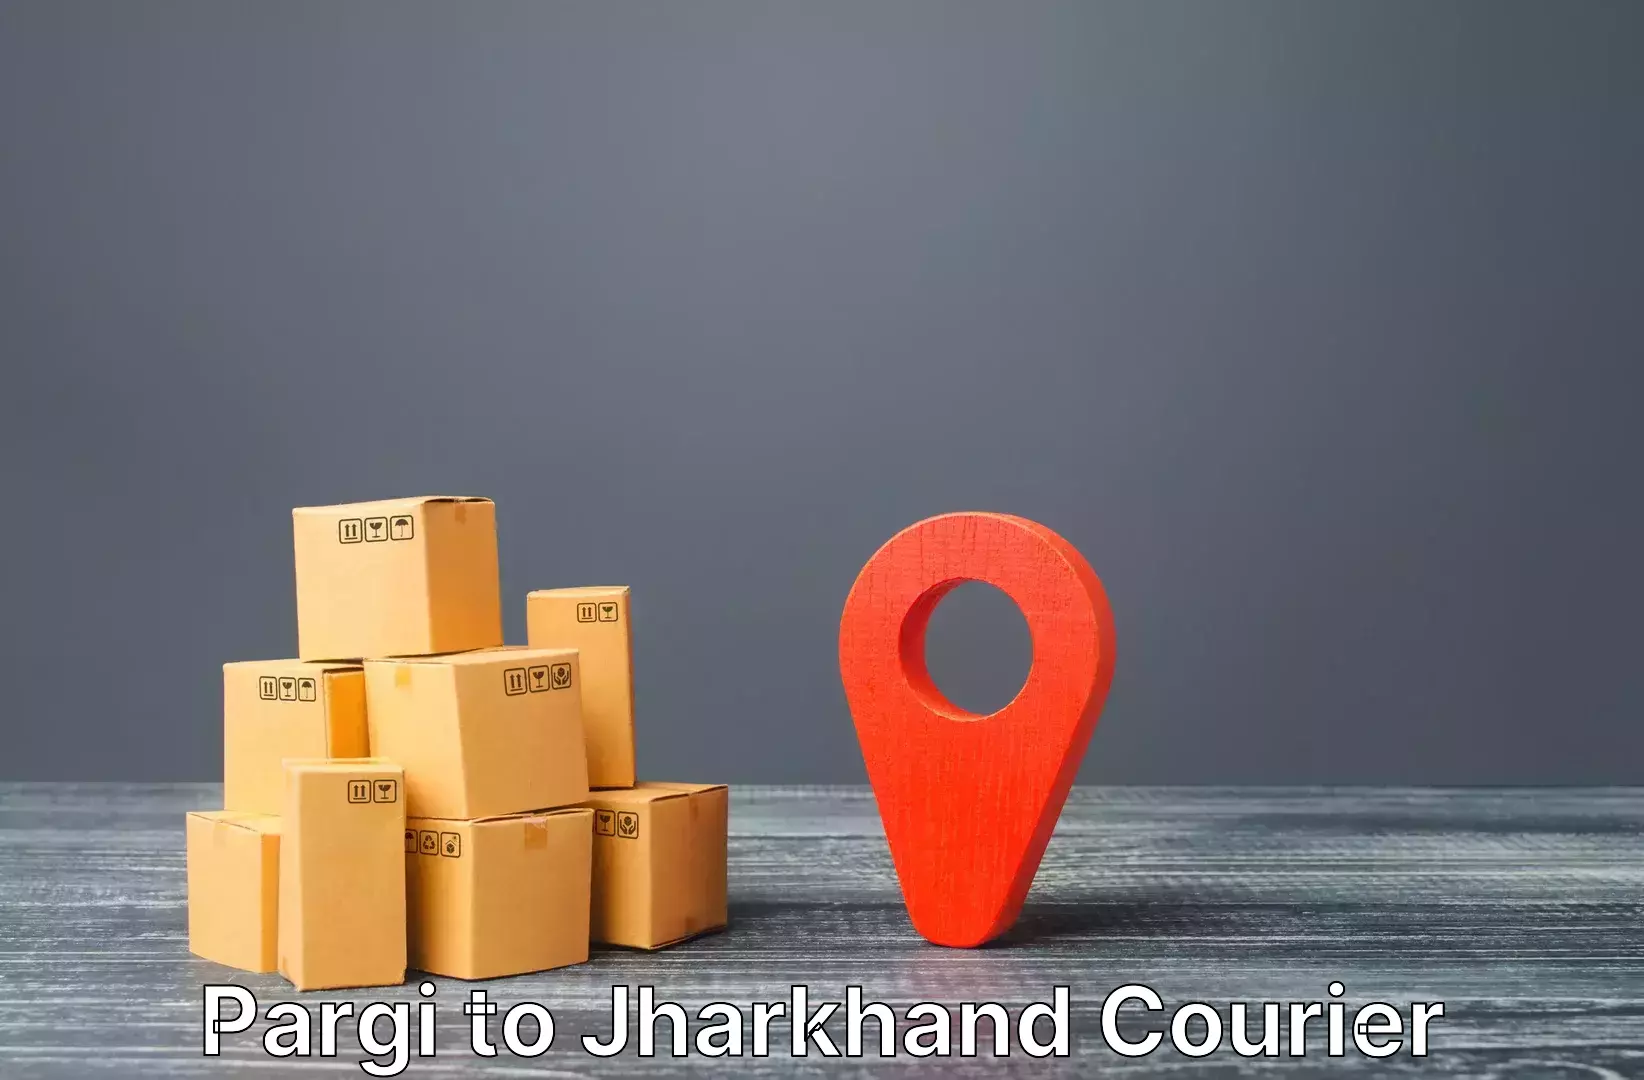 Online luggage shipping in Pargi to Dhanbad